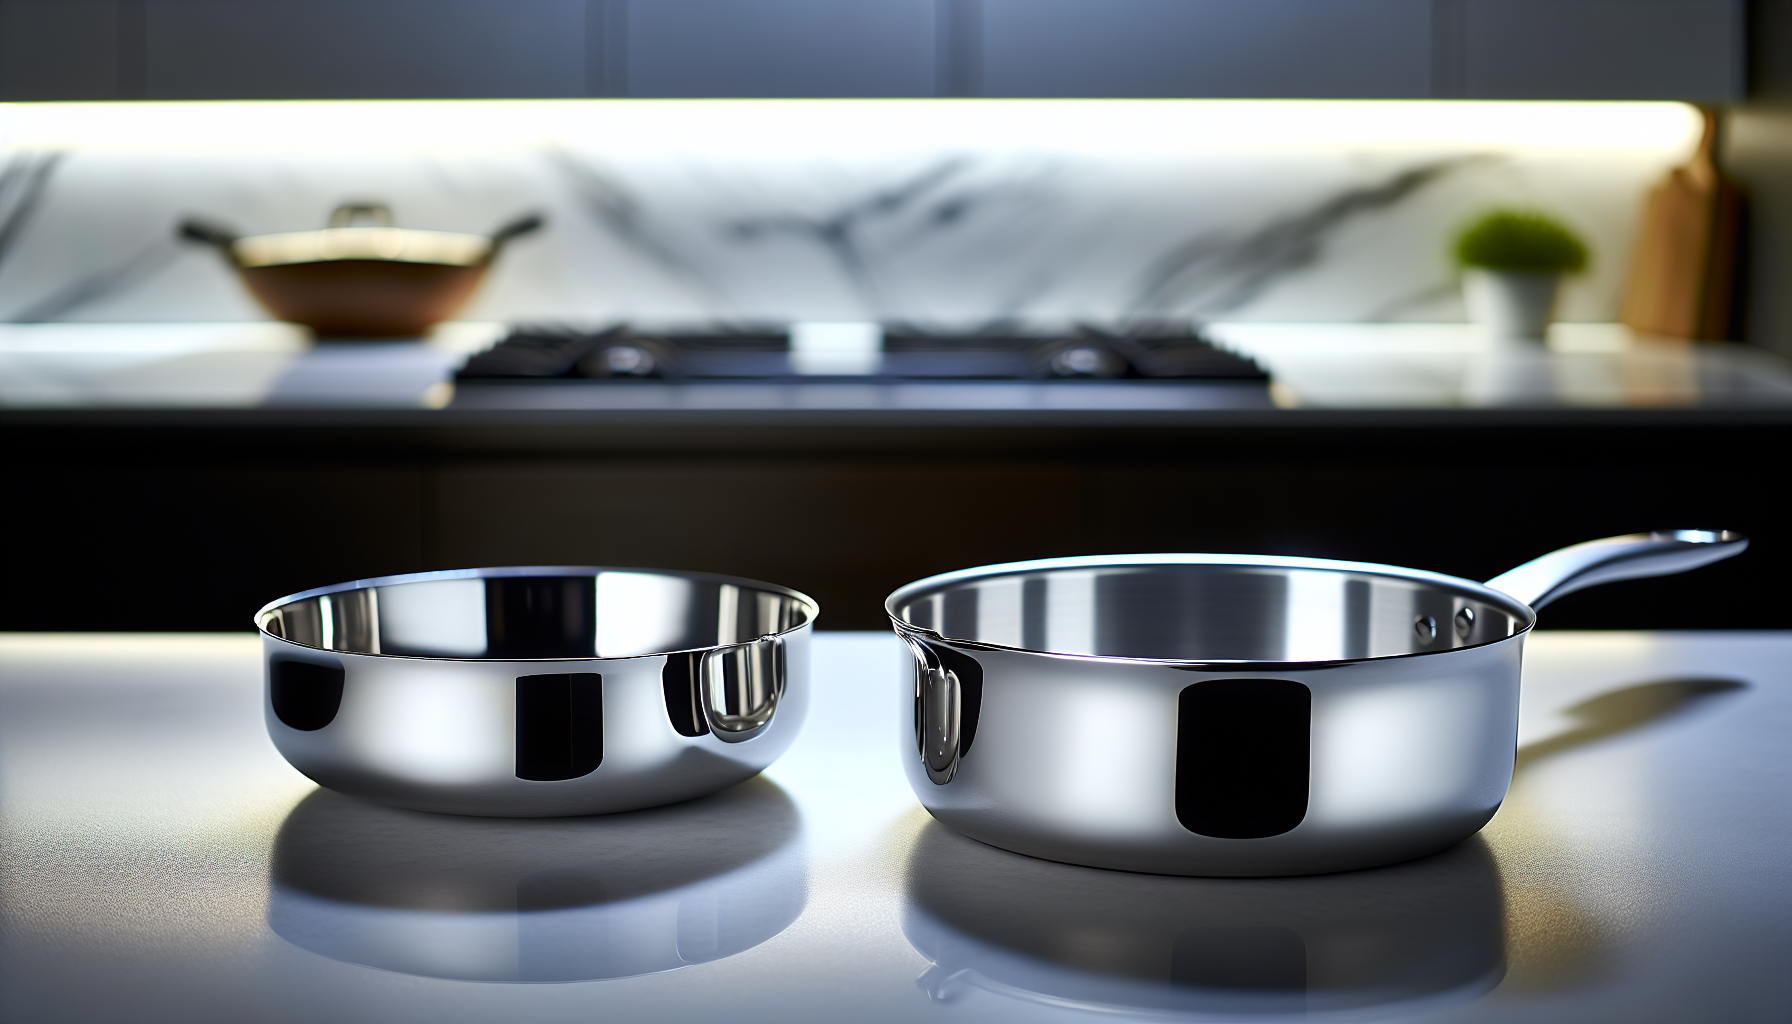 A shallow skillet and a deep skillet side by side on a kitchen counter